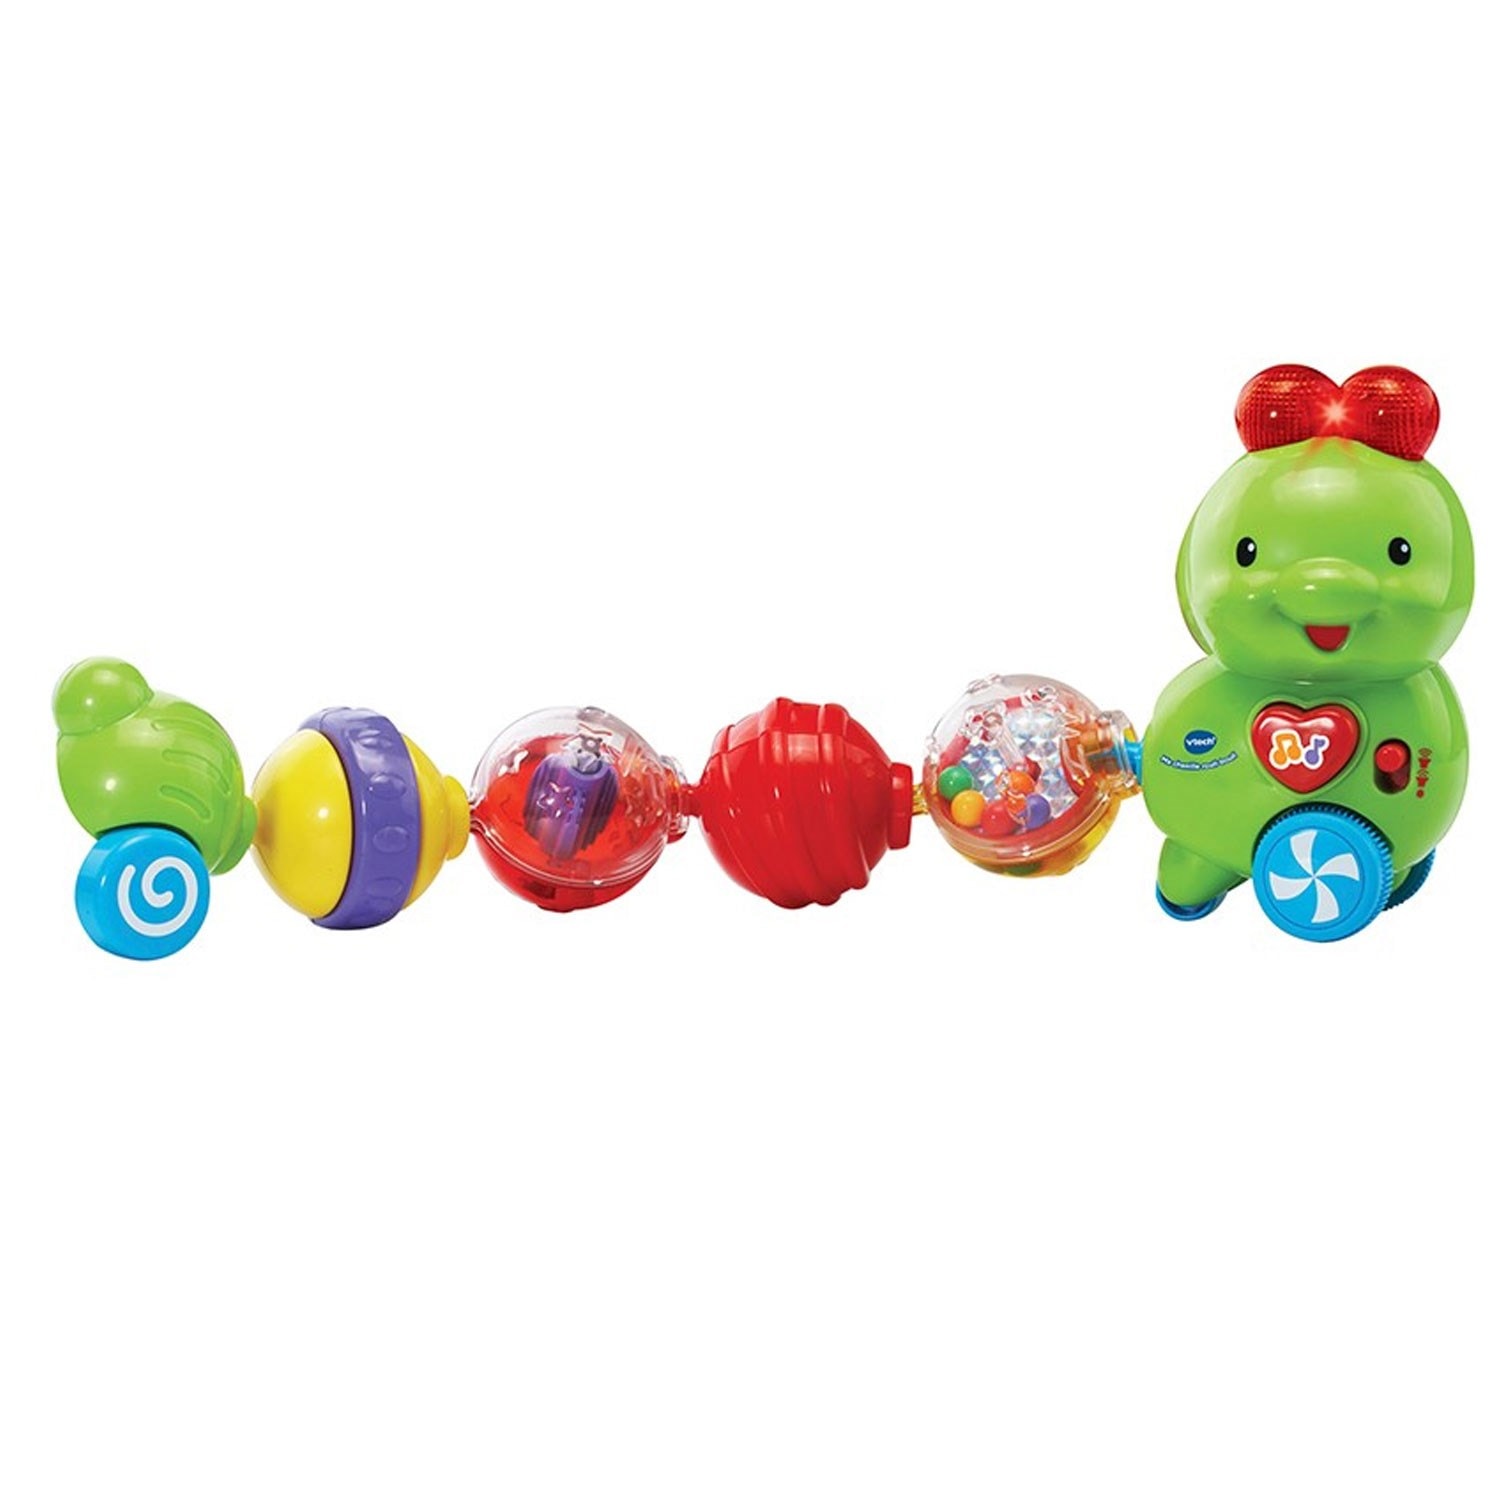 Chenille lumineuse, jouets 1er age